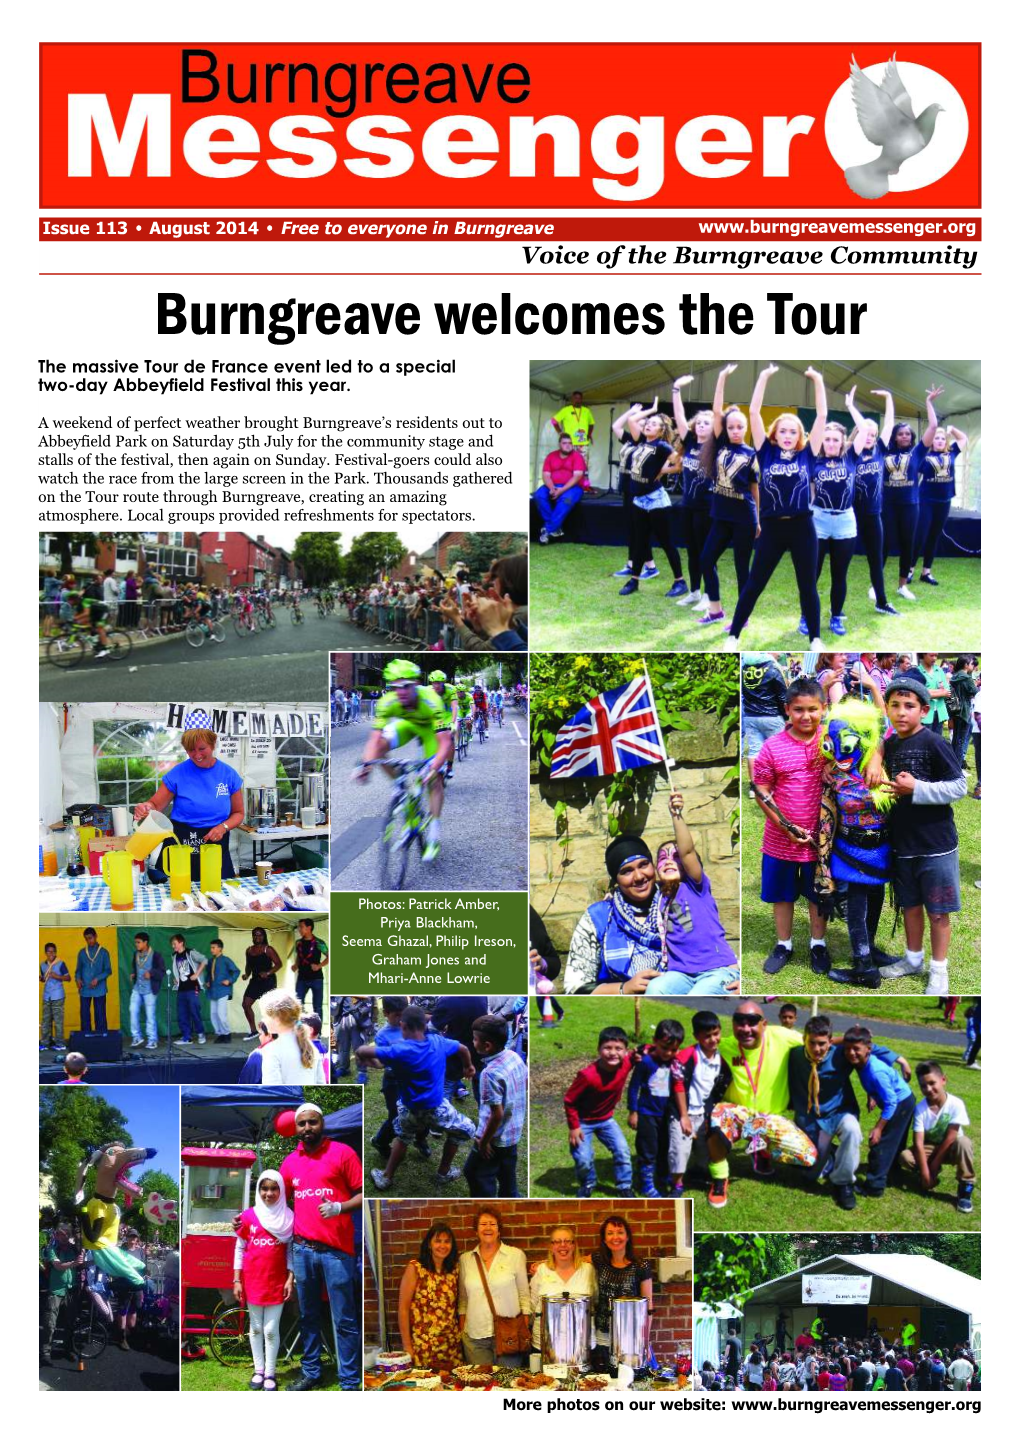 Burngreave Welcomes the Tour the Massive Tour De France Event Led to a Special Two-Day Abbeyfield Festival This Year